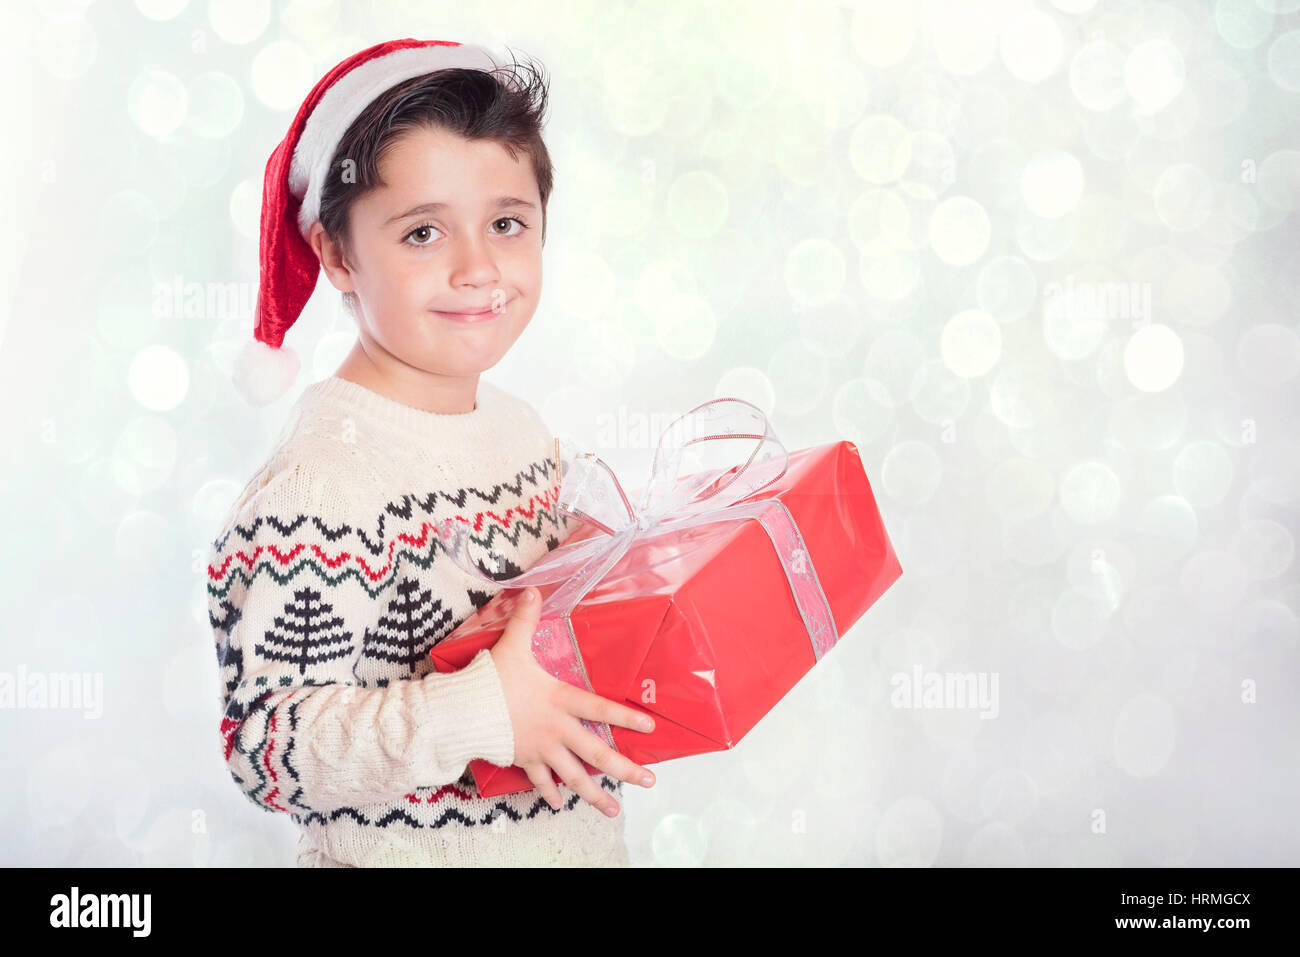 Little boy smiling at christmas Stock Photo